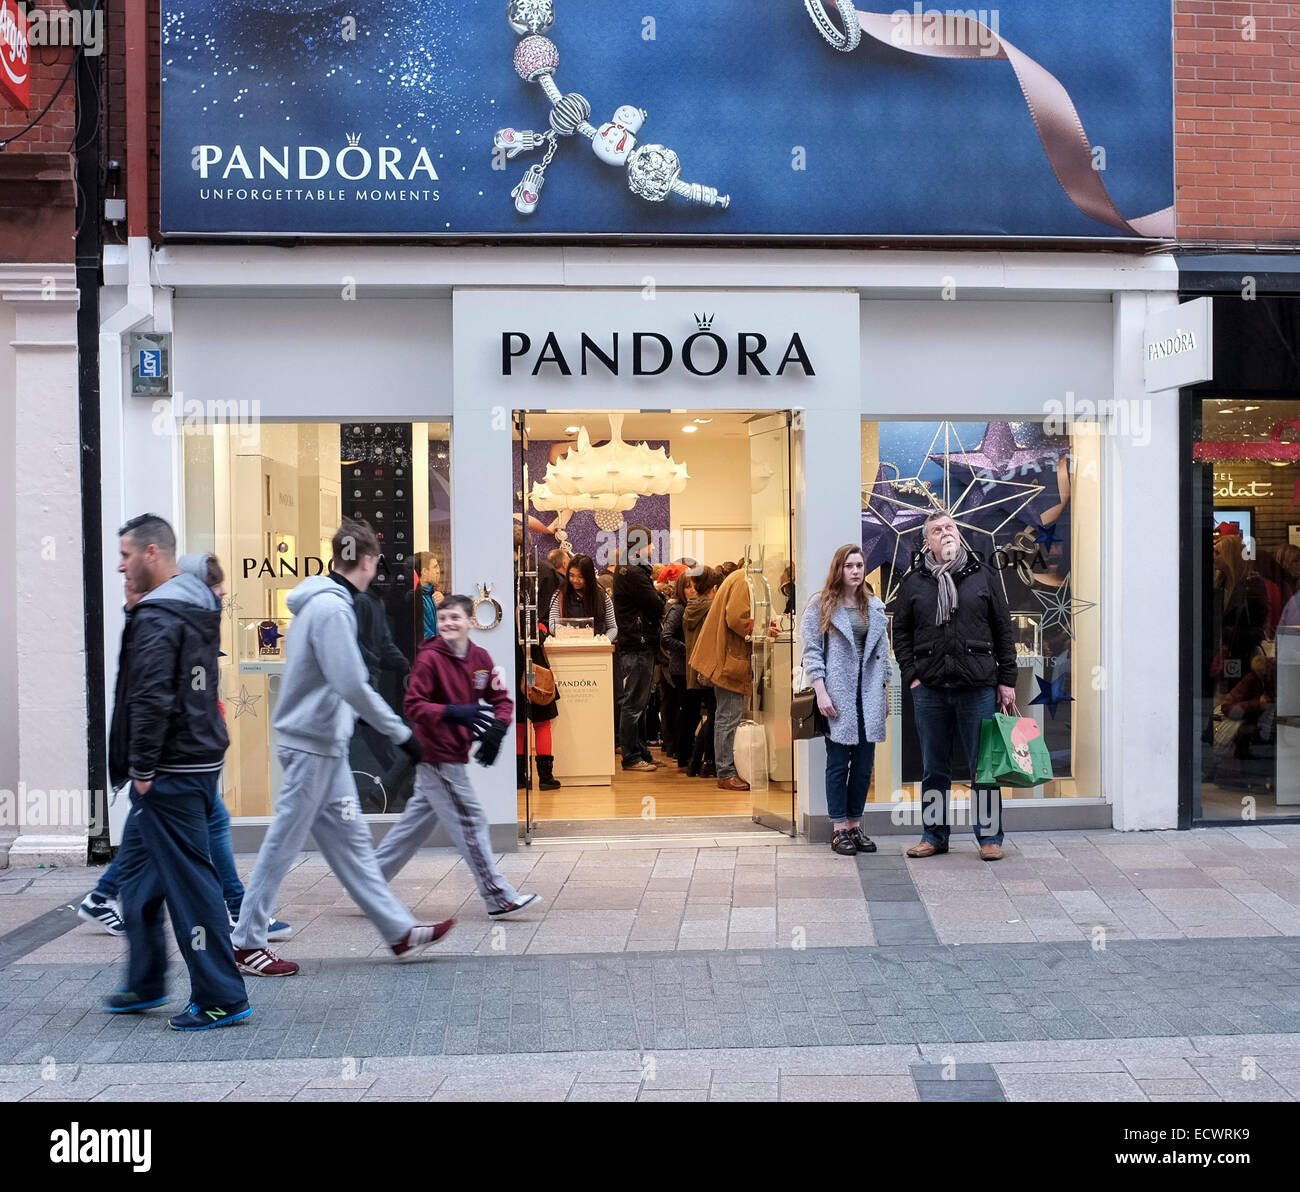 Pandora Jewellers High Resolution Stock Photography and Images - Alamy